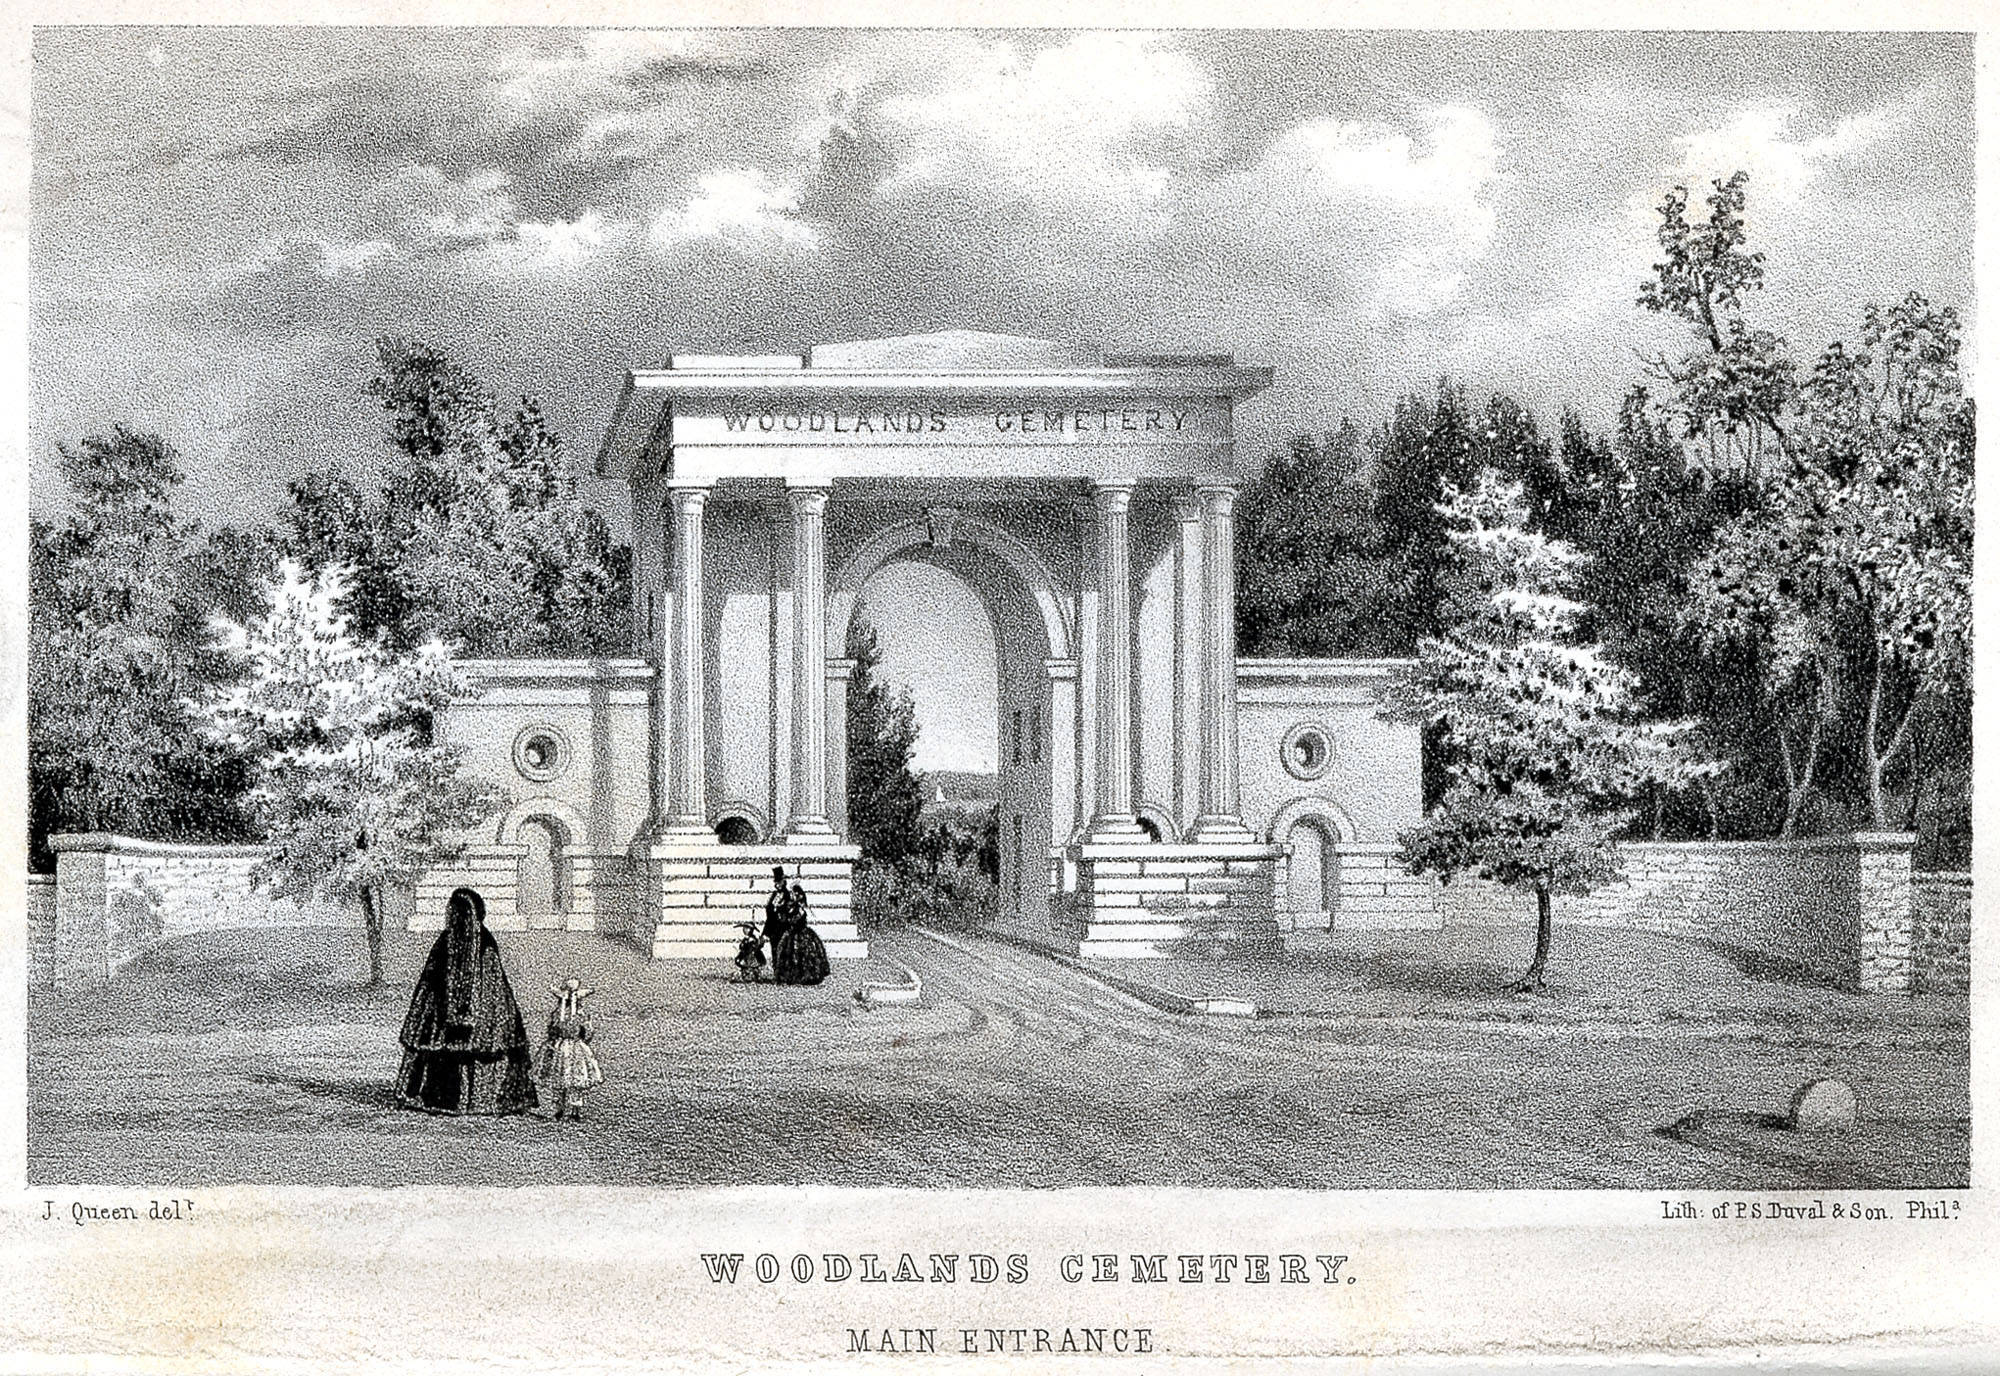 A black and white illustration of the front entrance of a rural cemetery with mourners entering.